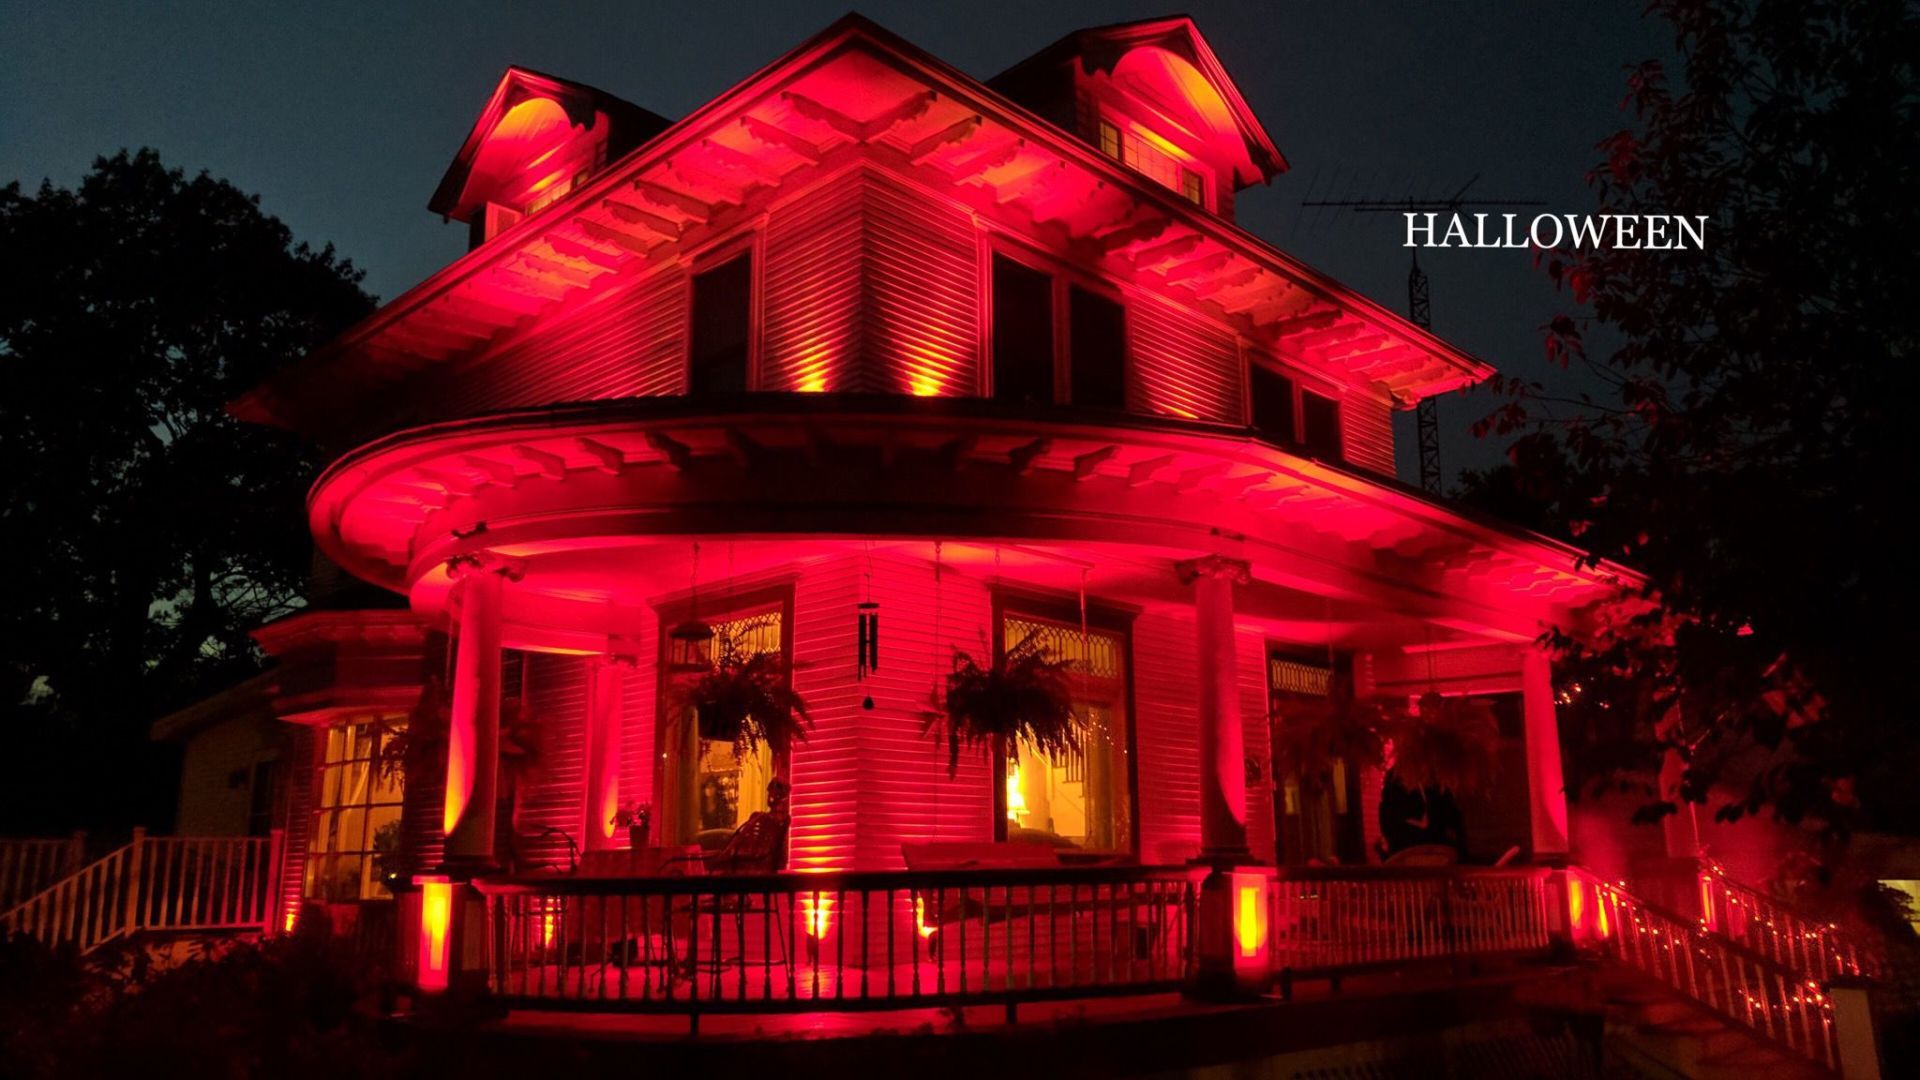 Light installation on a residential home during the Halloween